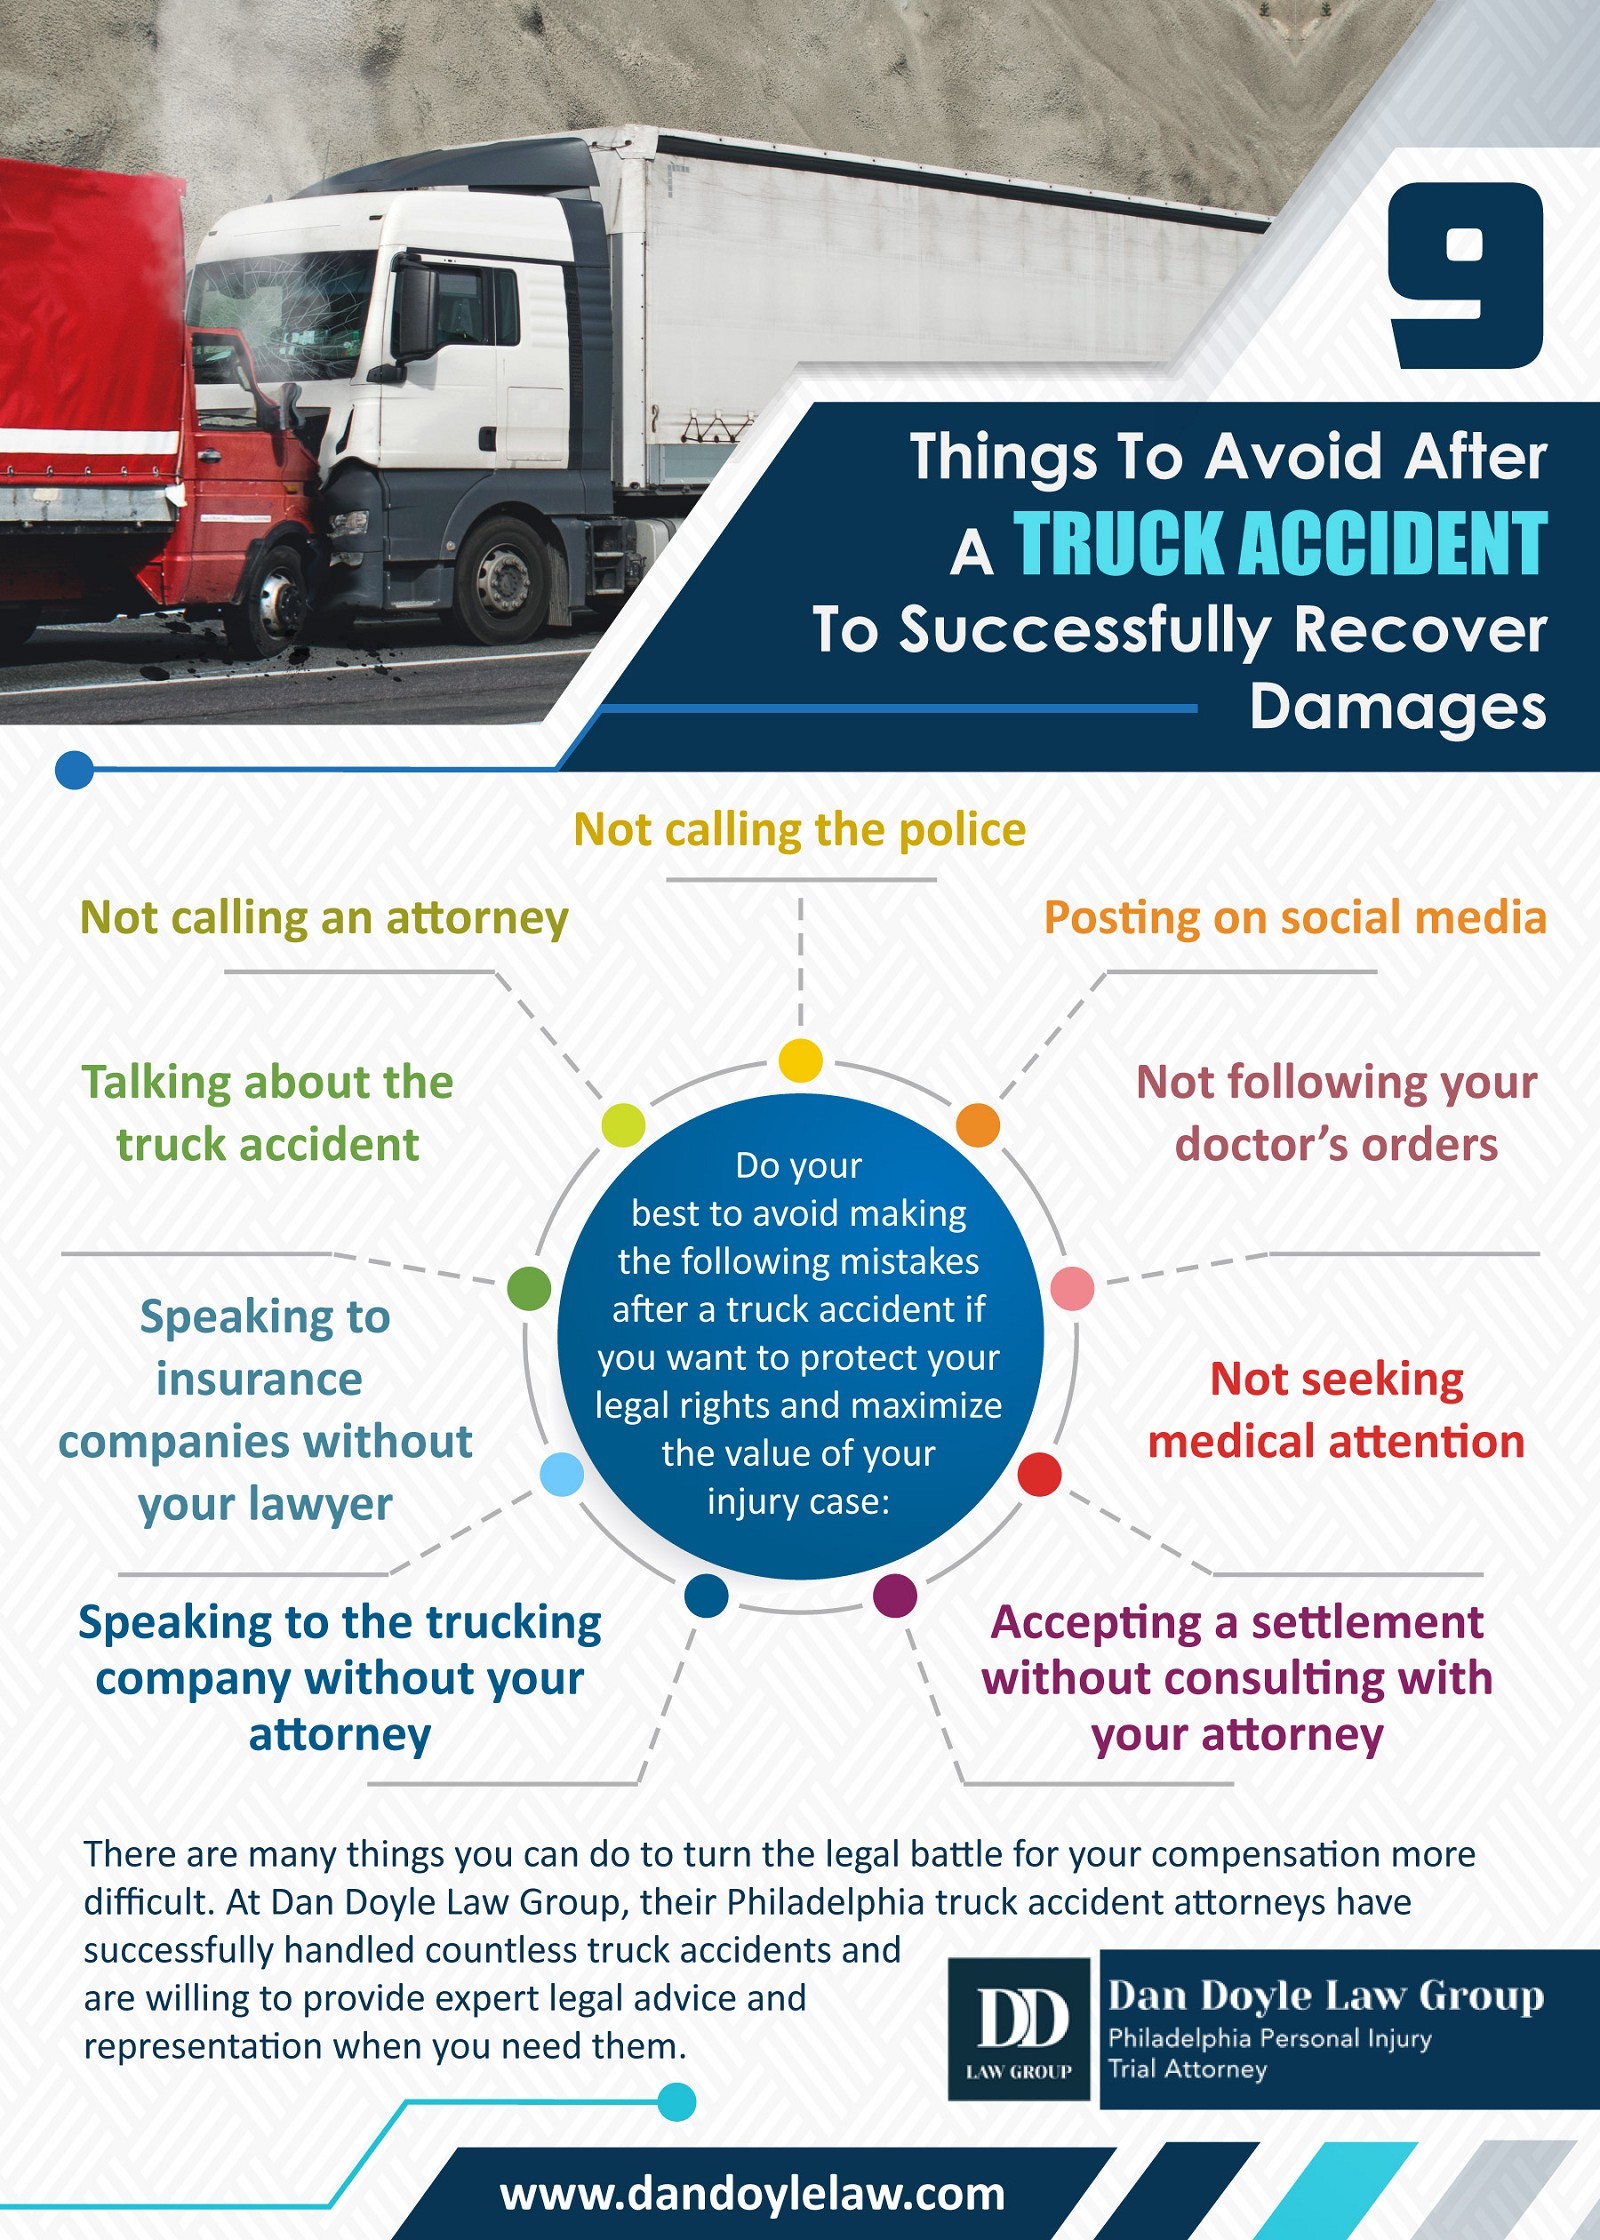 Some Things To Avoid After A Truck Accident To Successfully Recover Damages